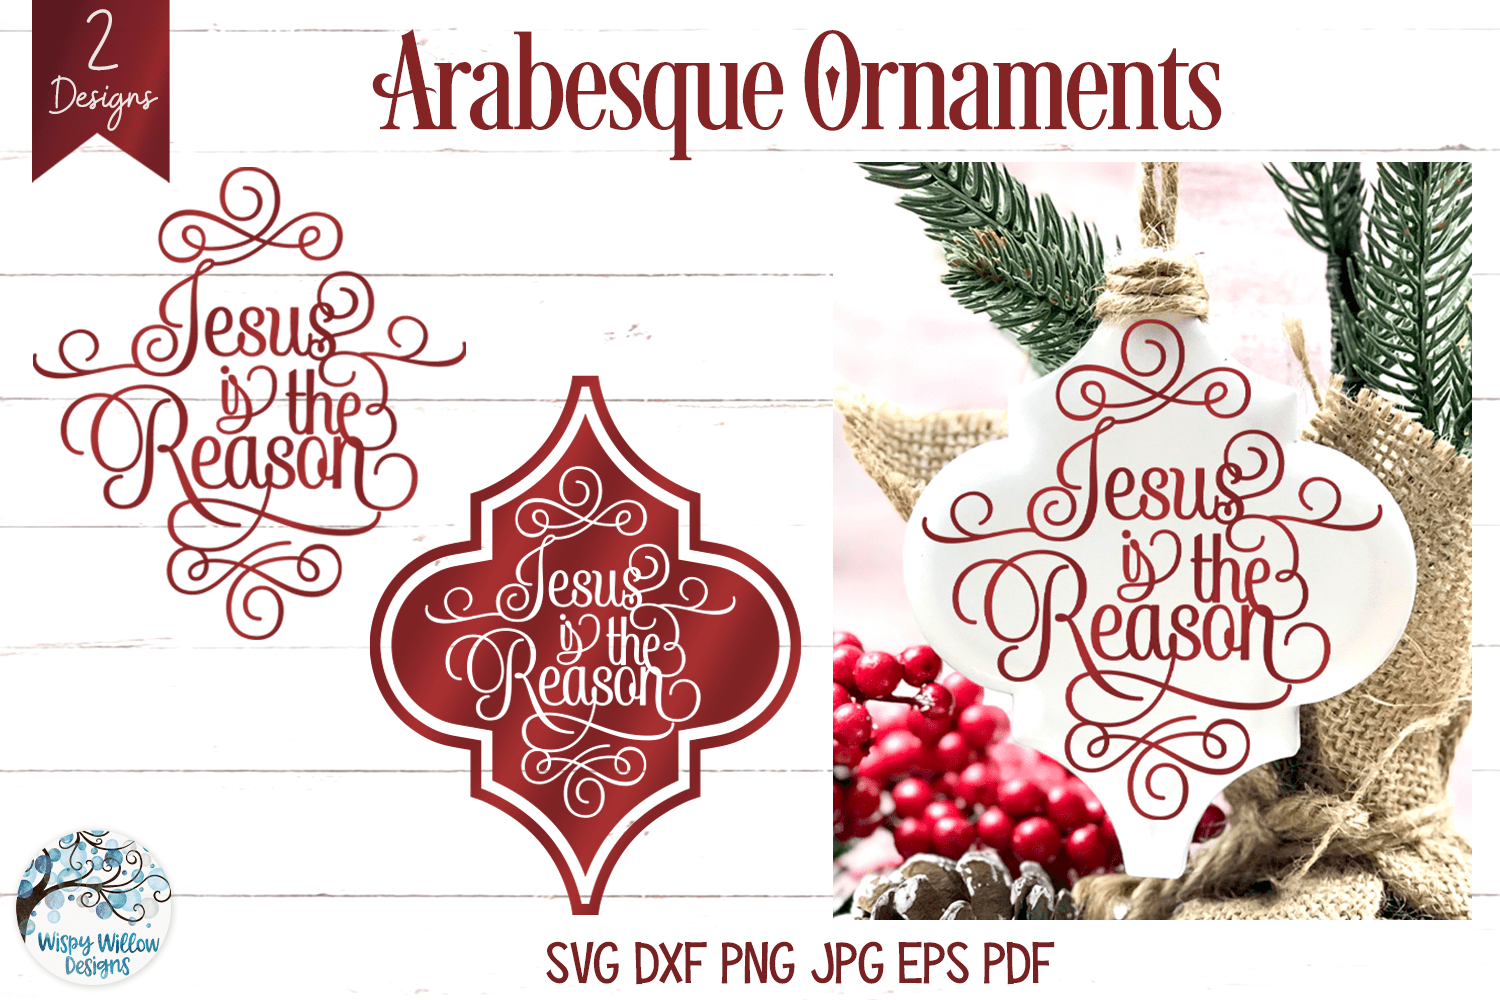 Jesus Is The Reason Arabesque Ornament SVG | Christmas Ornaments Wispy Willow Designs Company